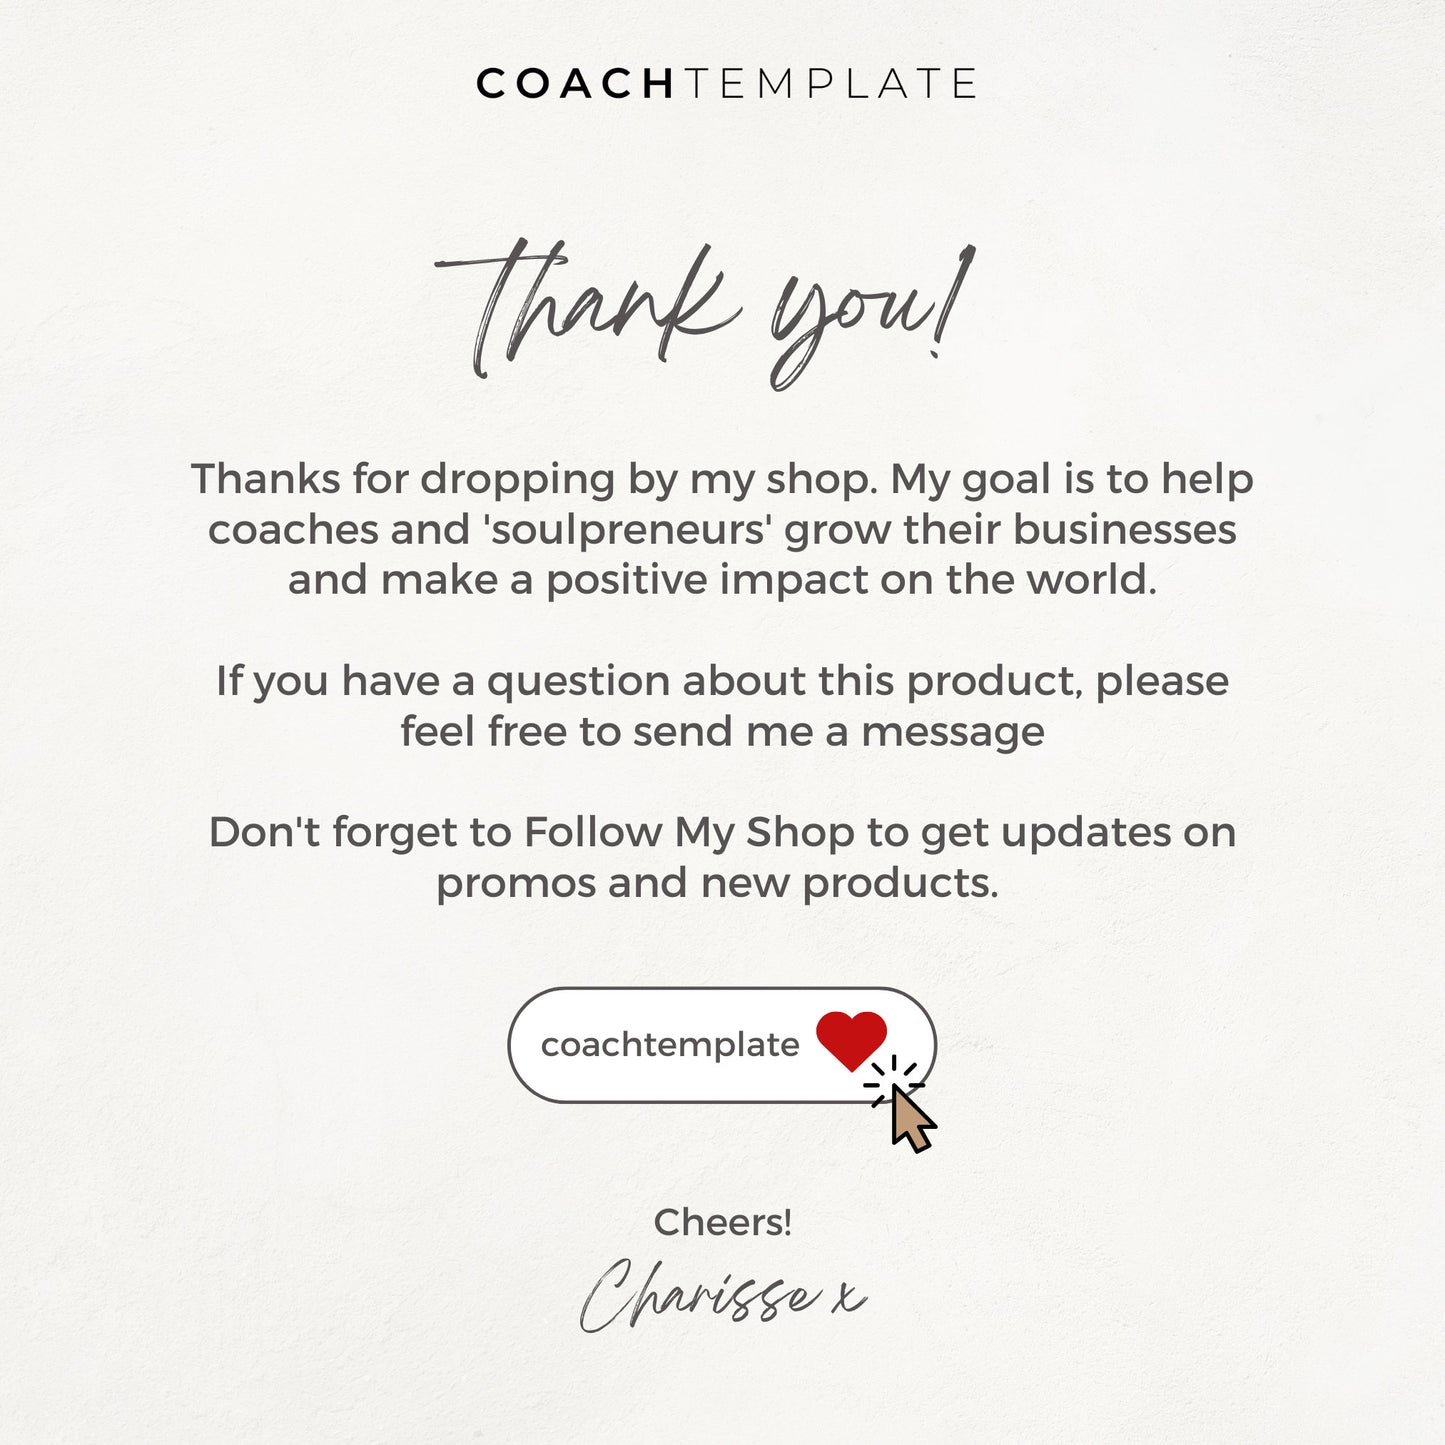 Editable Social Media Posts for Coaches | Canva Template for Life Wellness Business Spiritual Coach Blogger | Testimonials Motivation Quotes Promotional Posts

CT053 CoachTemplate.com